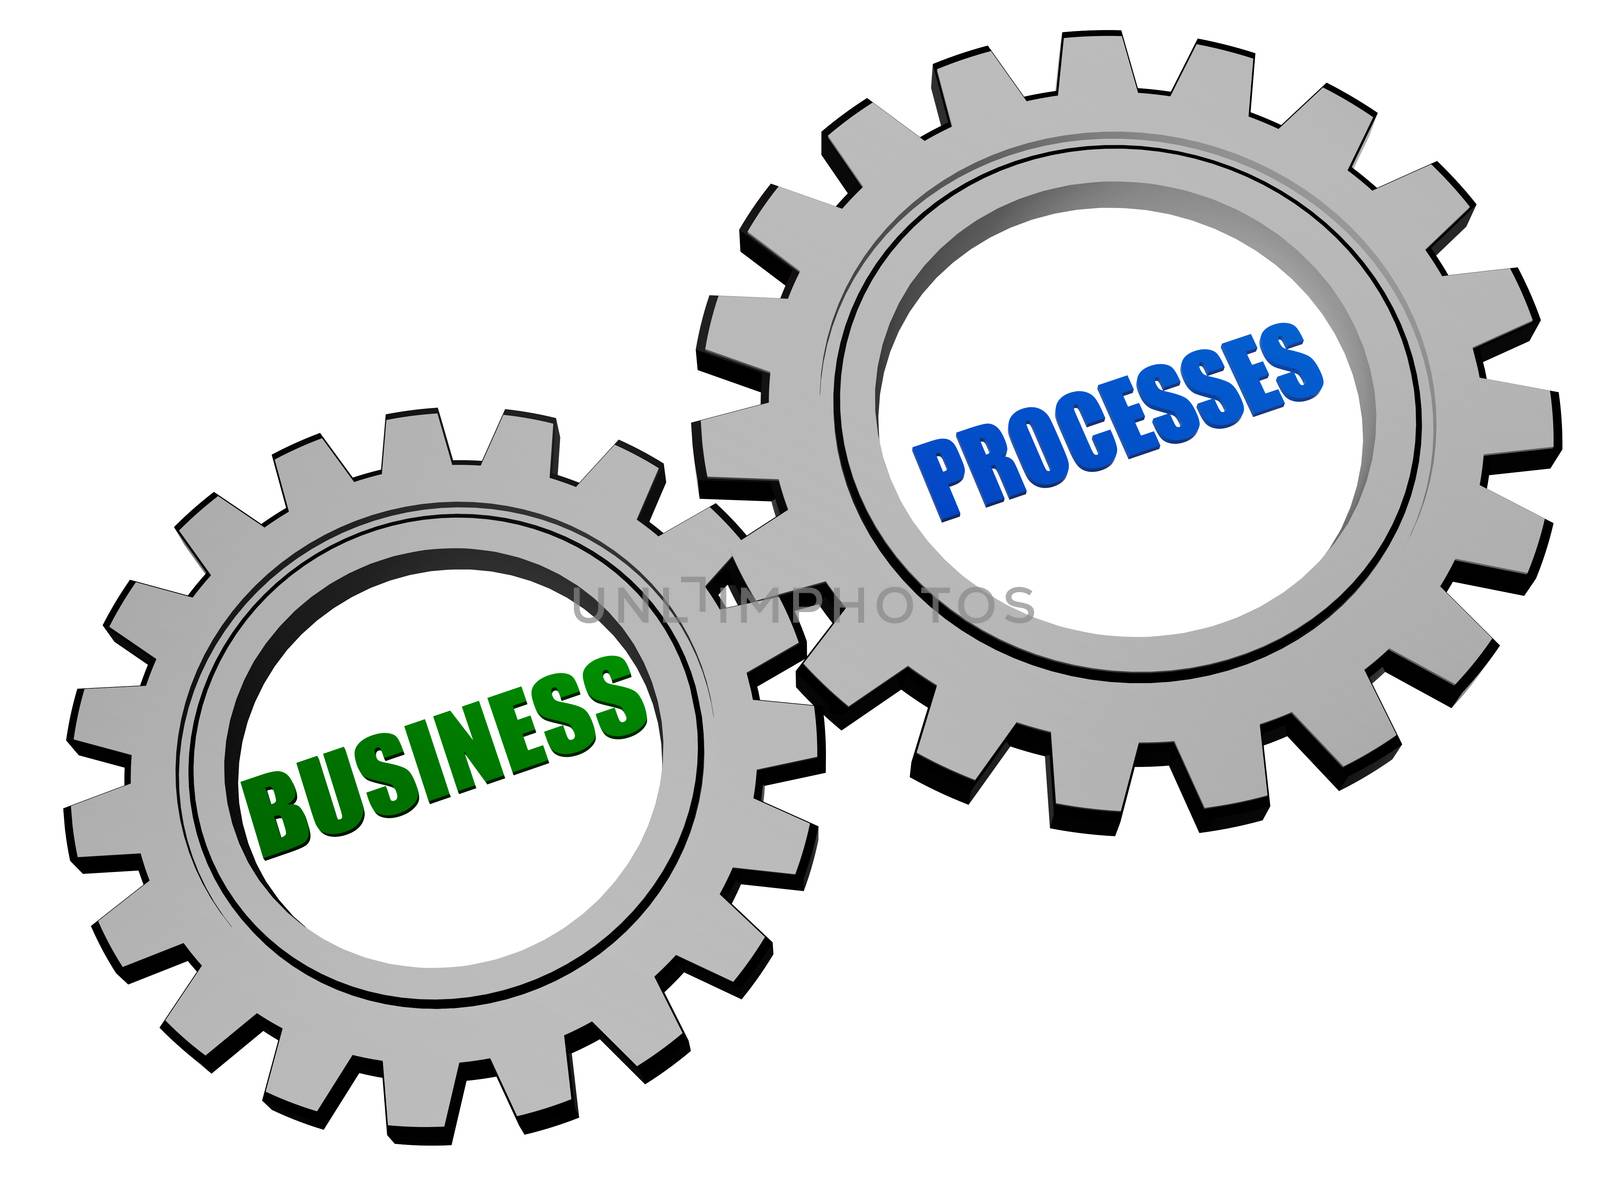 business processes in silver grey gears by marinini